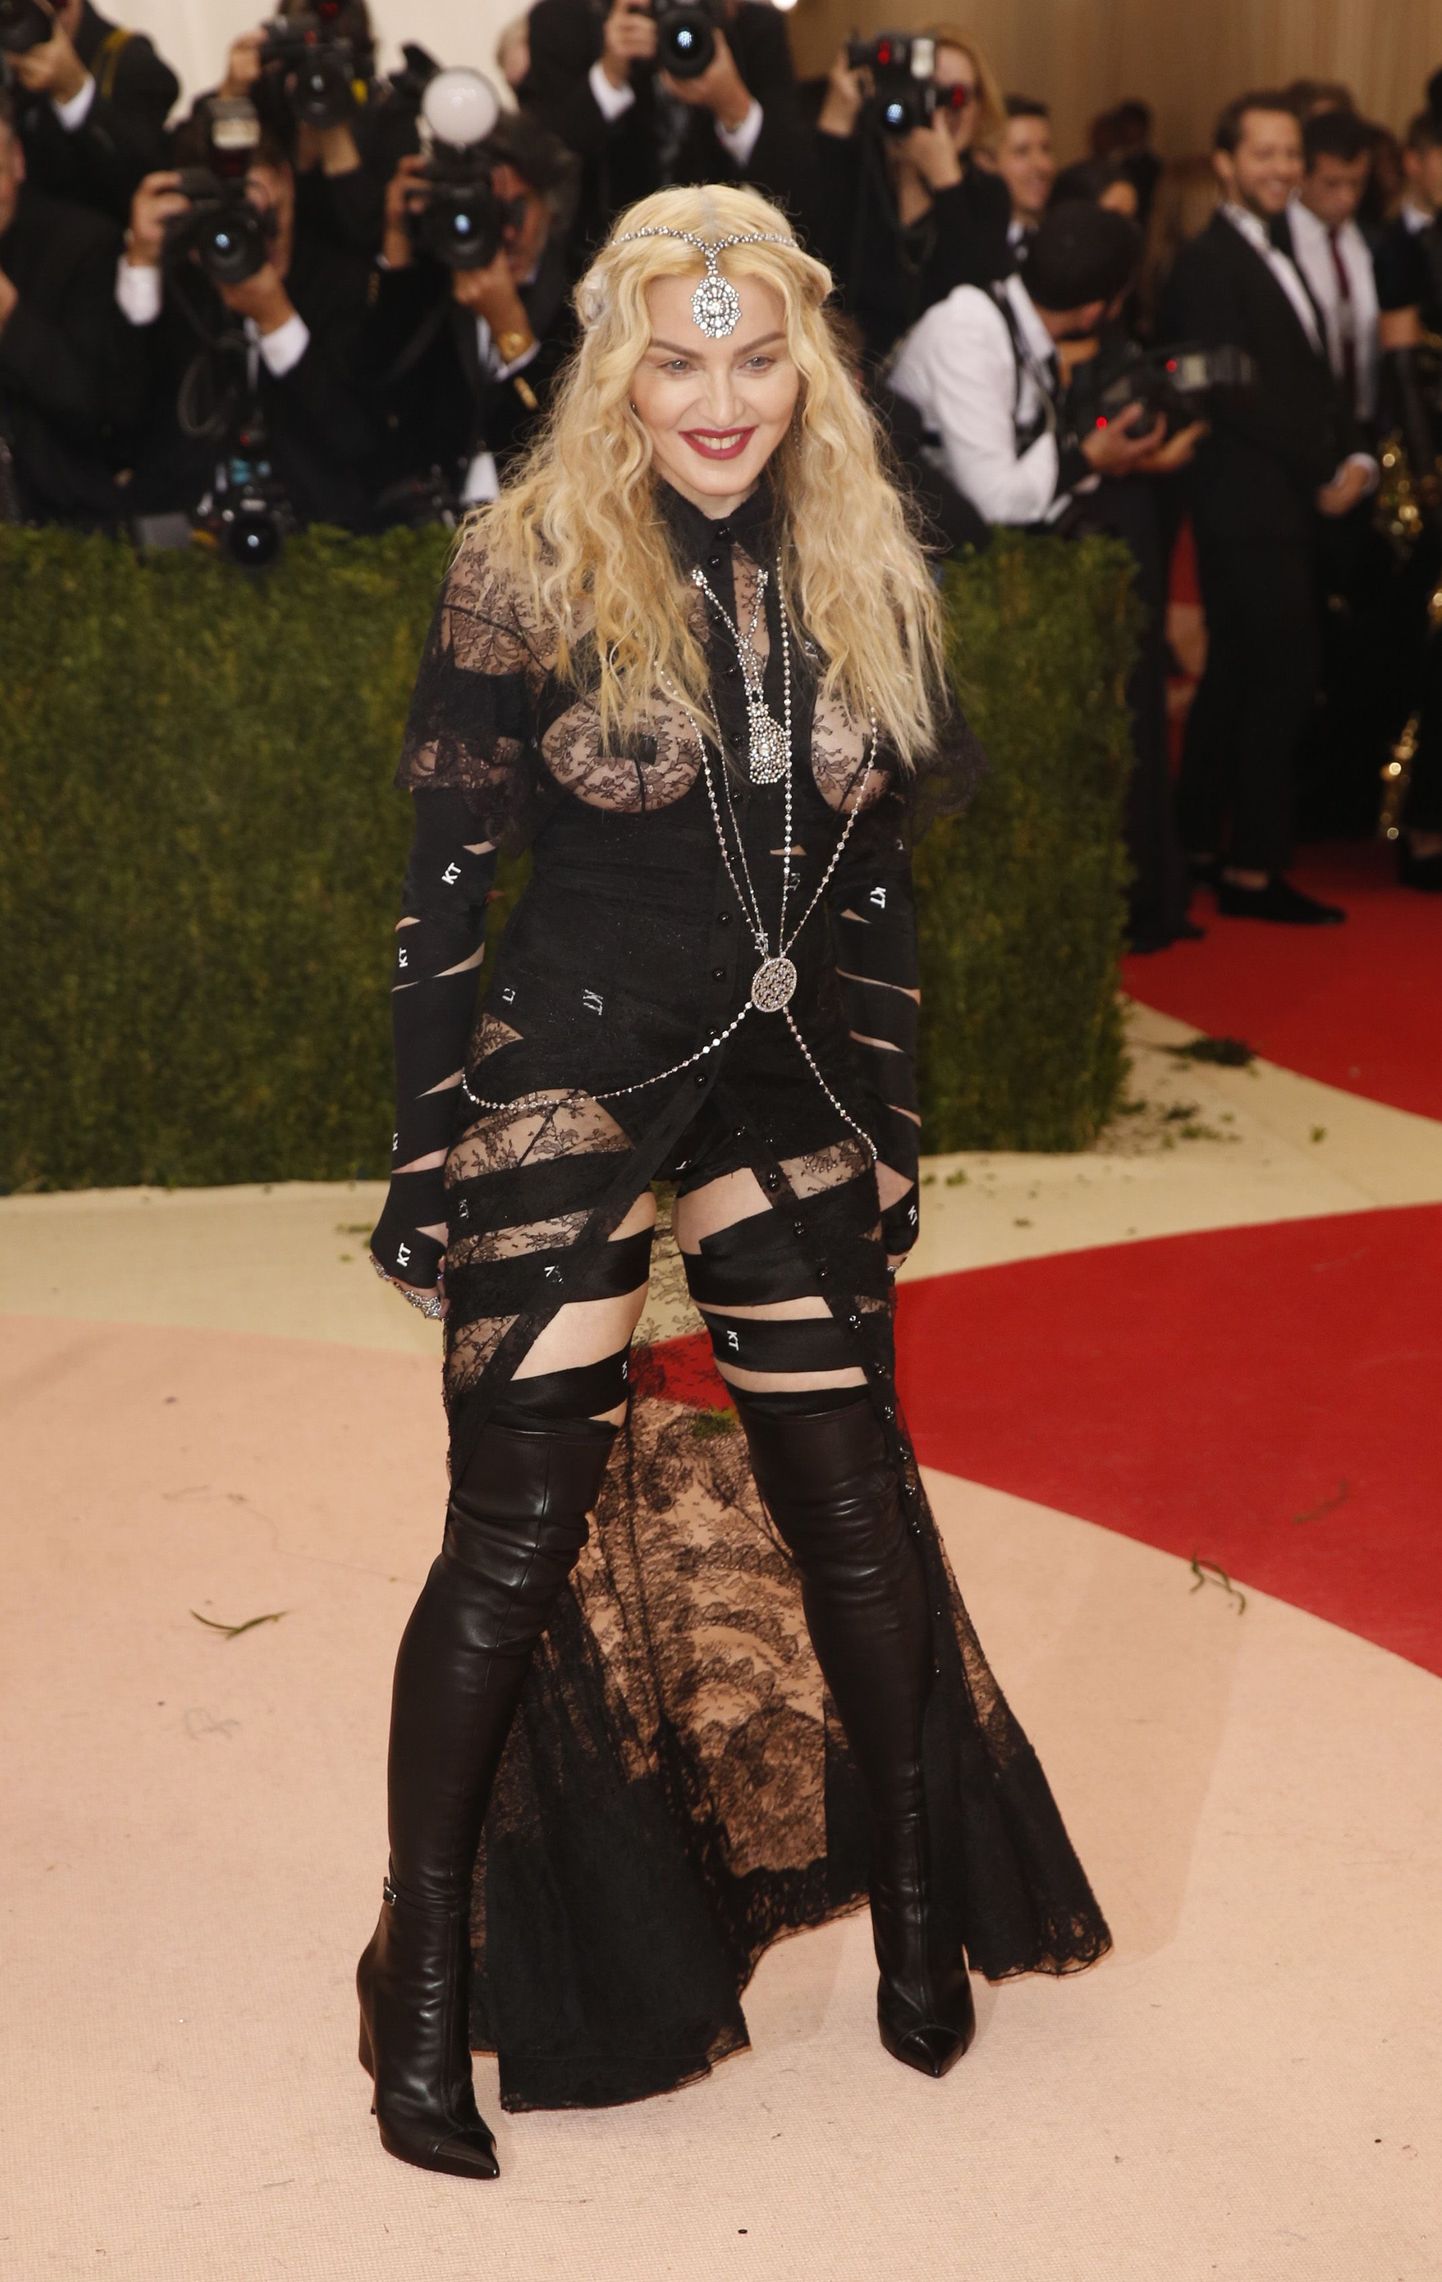 Singer Madonna arrives at the Metropolitan Museum of Art Costume Institute Gala (Met Gala) to celebrate the opening of "Manus x Machina: Fashion in an Age of Technology" in the Manhattan borough of New York, U.S. May 2, 2016.  REUTERS/Lucas Jackson